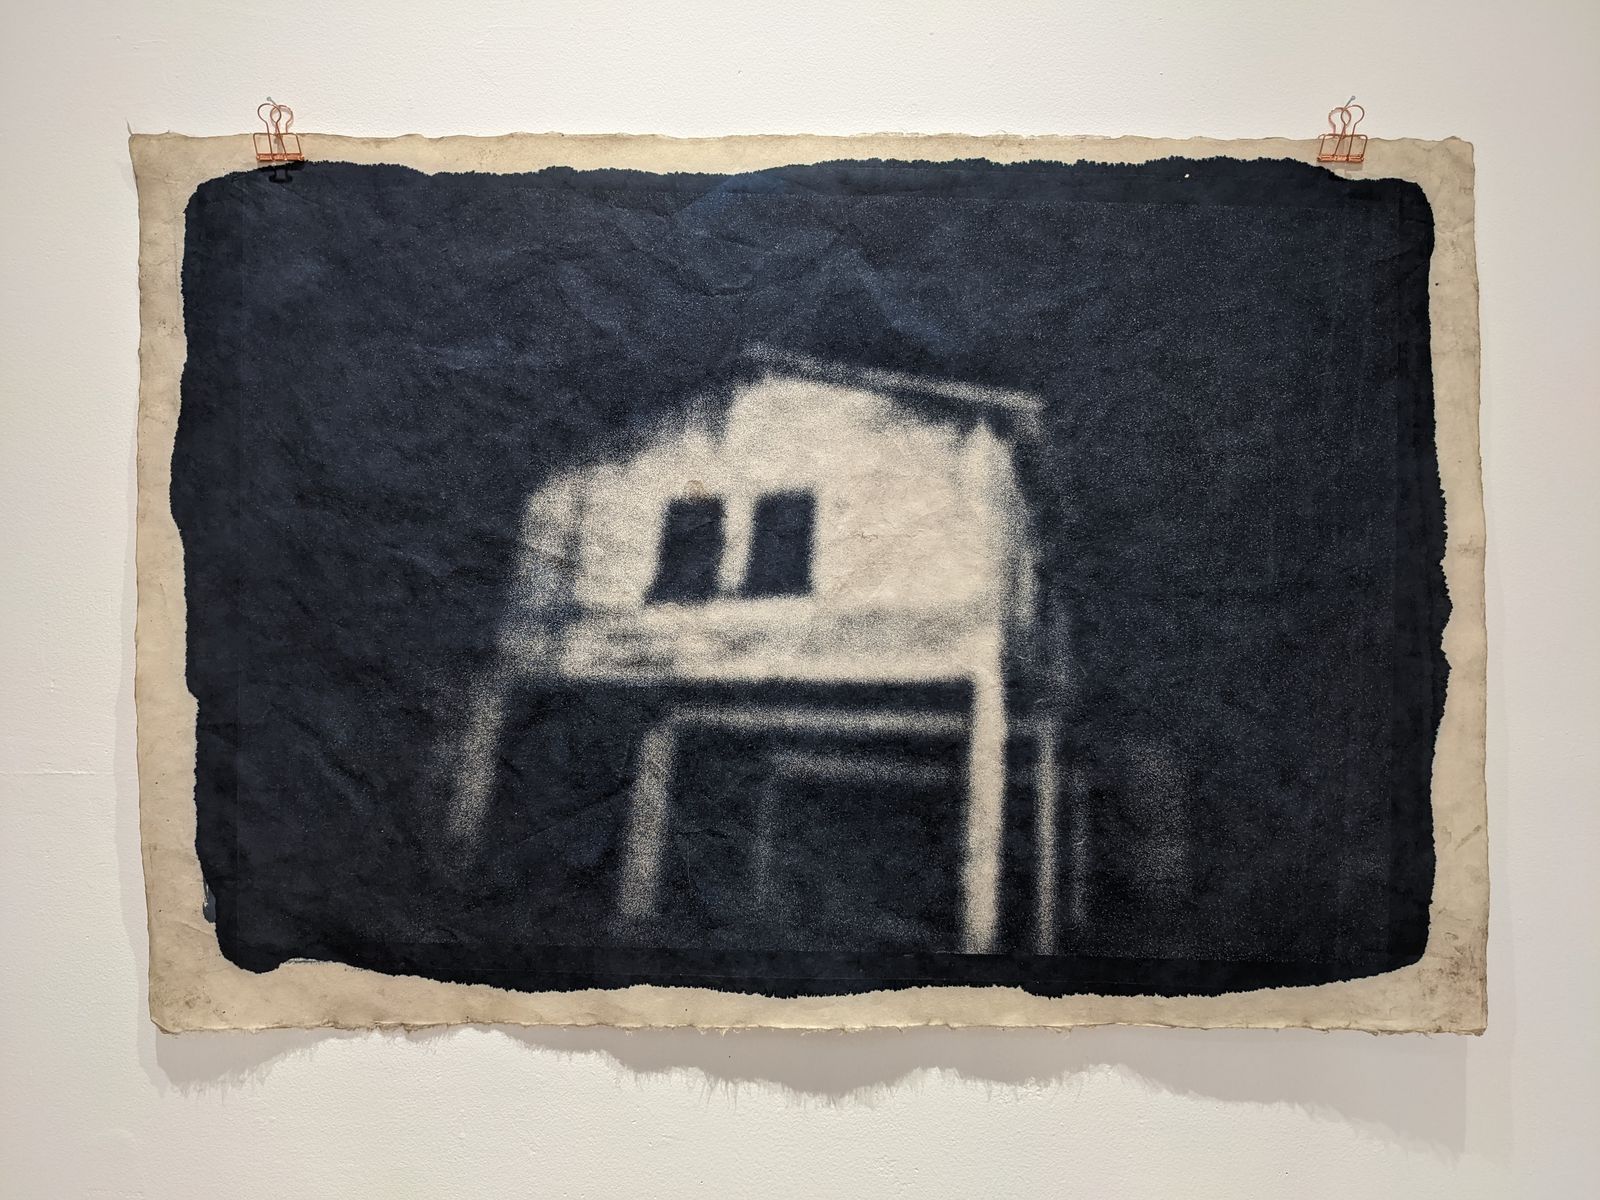 © Tomasz Laczny - Large format cyanotape (tonned in coffe) printed on handmade japanese kozo paper 96x69cm